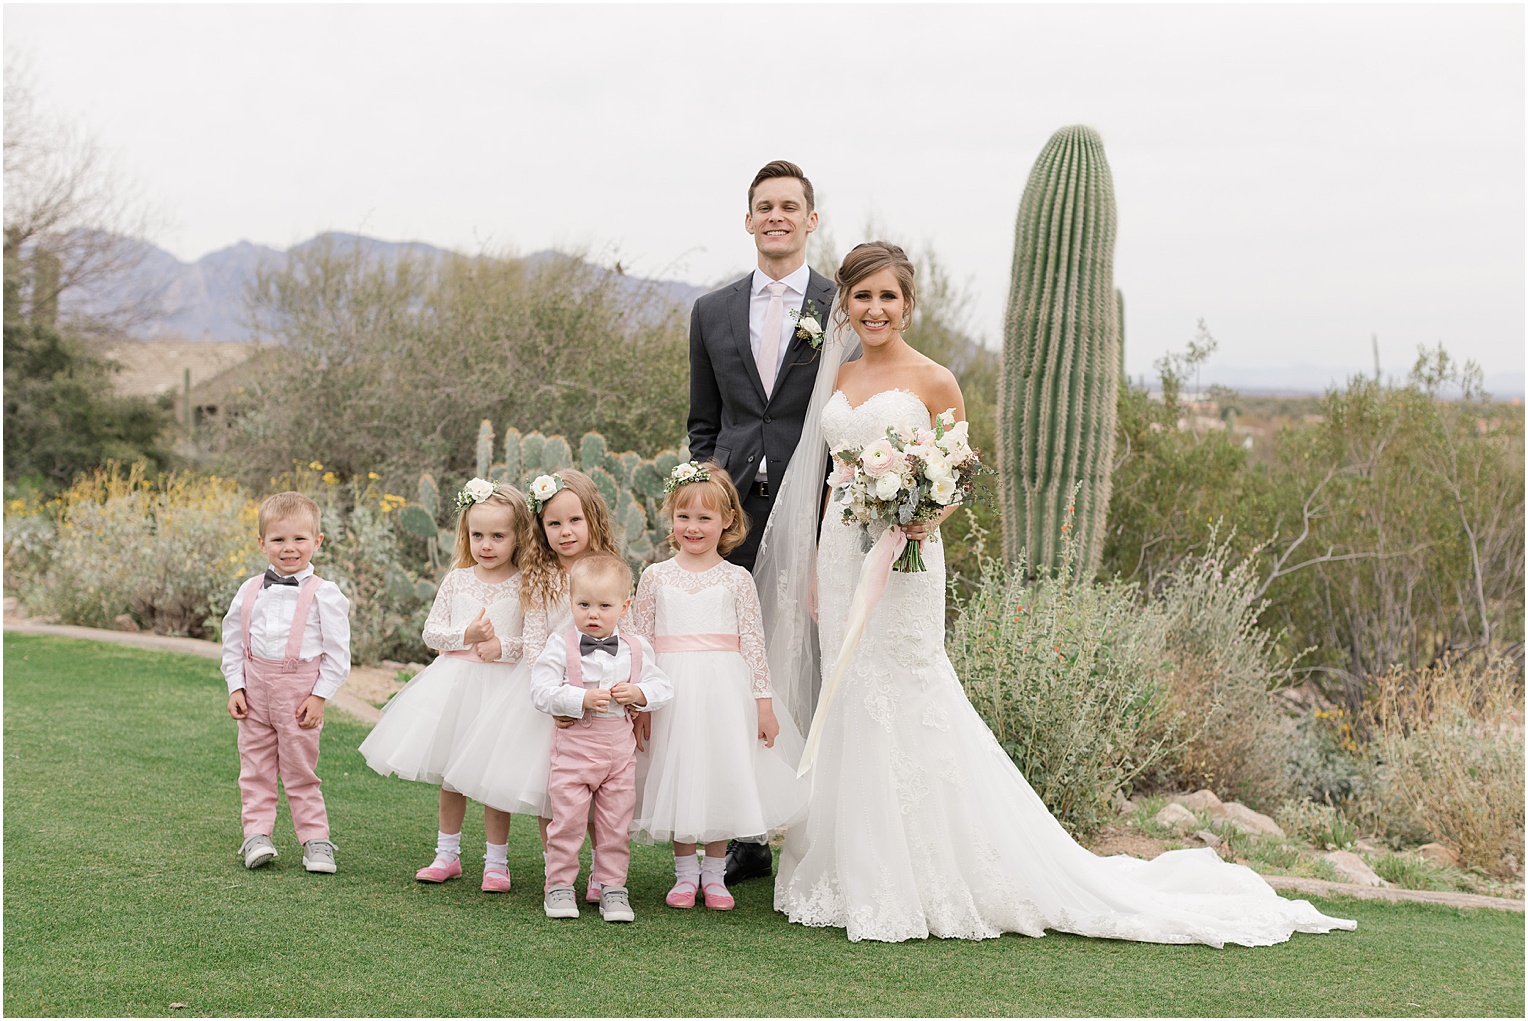 Highlands at Dove Mountain Wedding Grace + Danny bride and groom with flower girls and ring bearers in blush